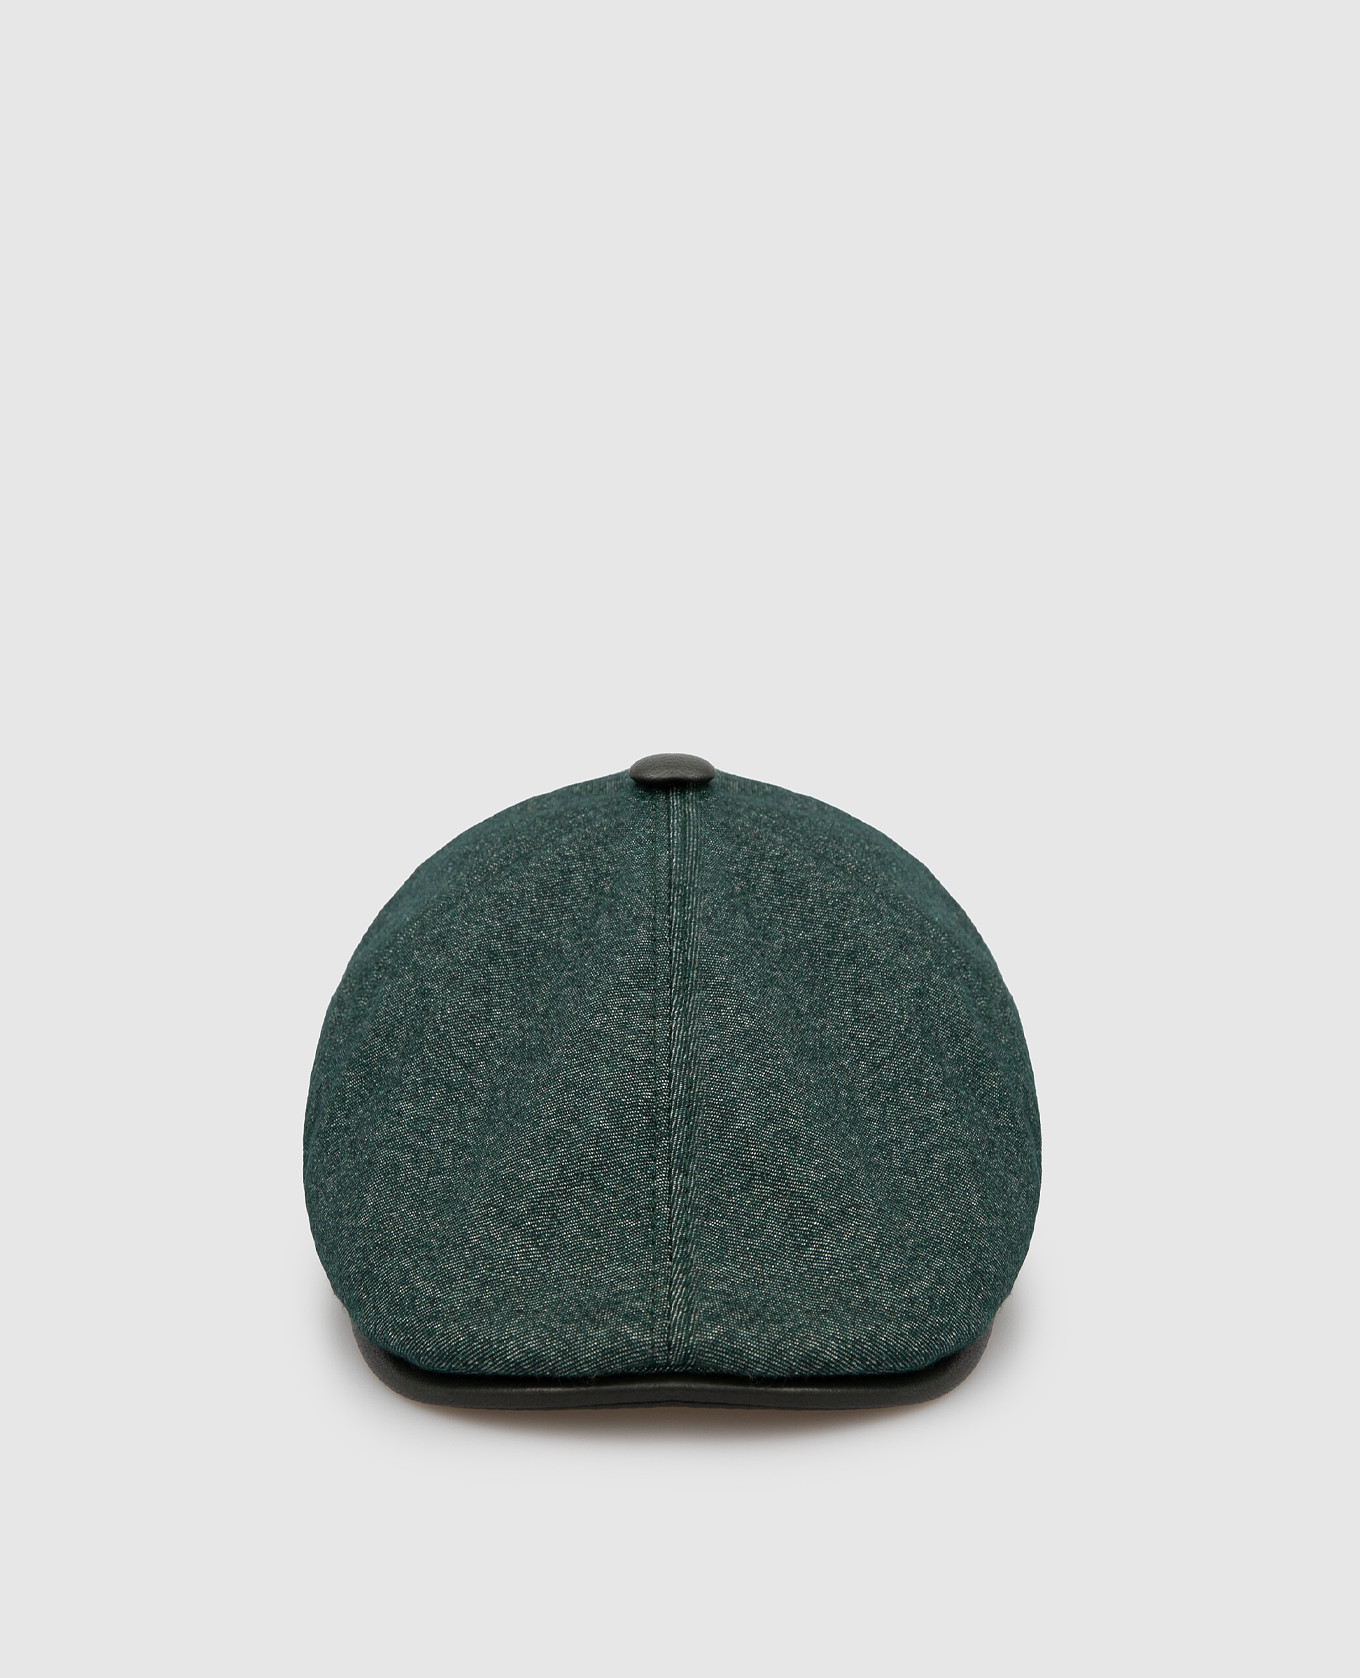 Children's cap with leather inserts